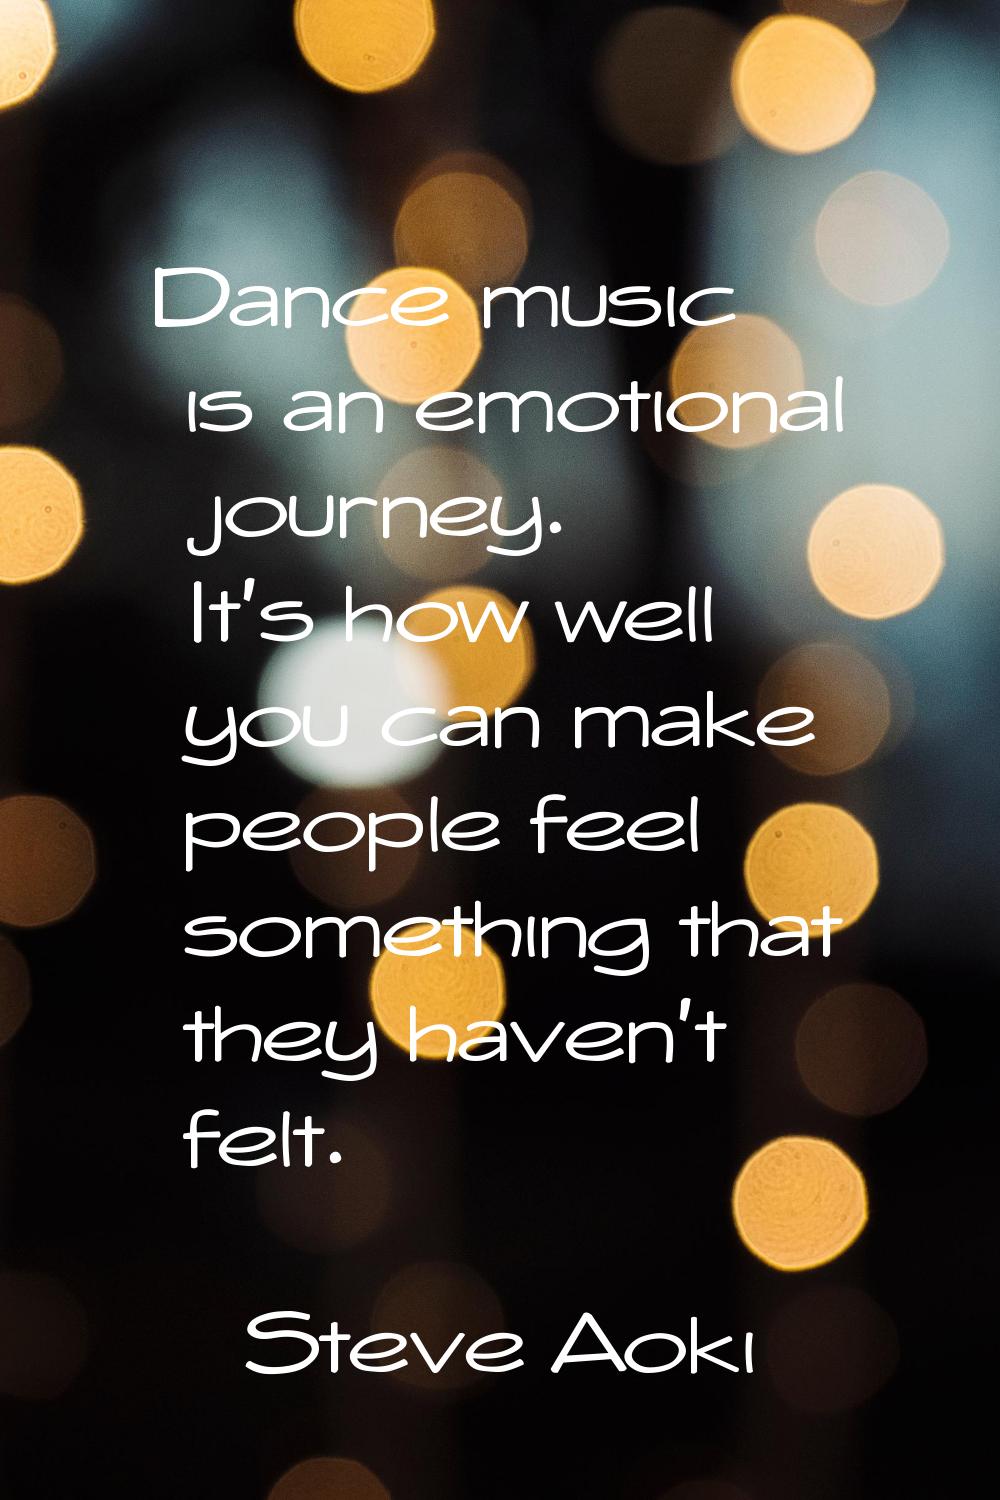 Dance music is an emotional journey. It's how well you can make people feel something that they hav